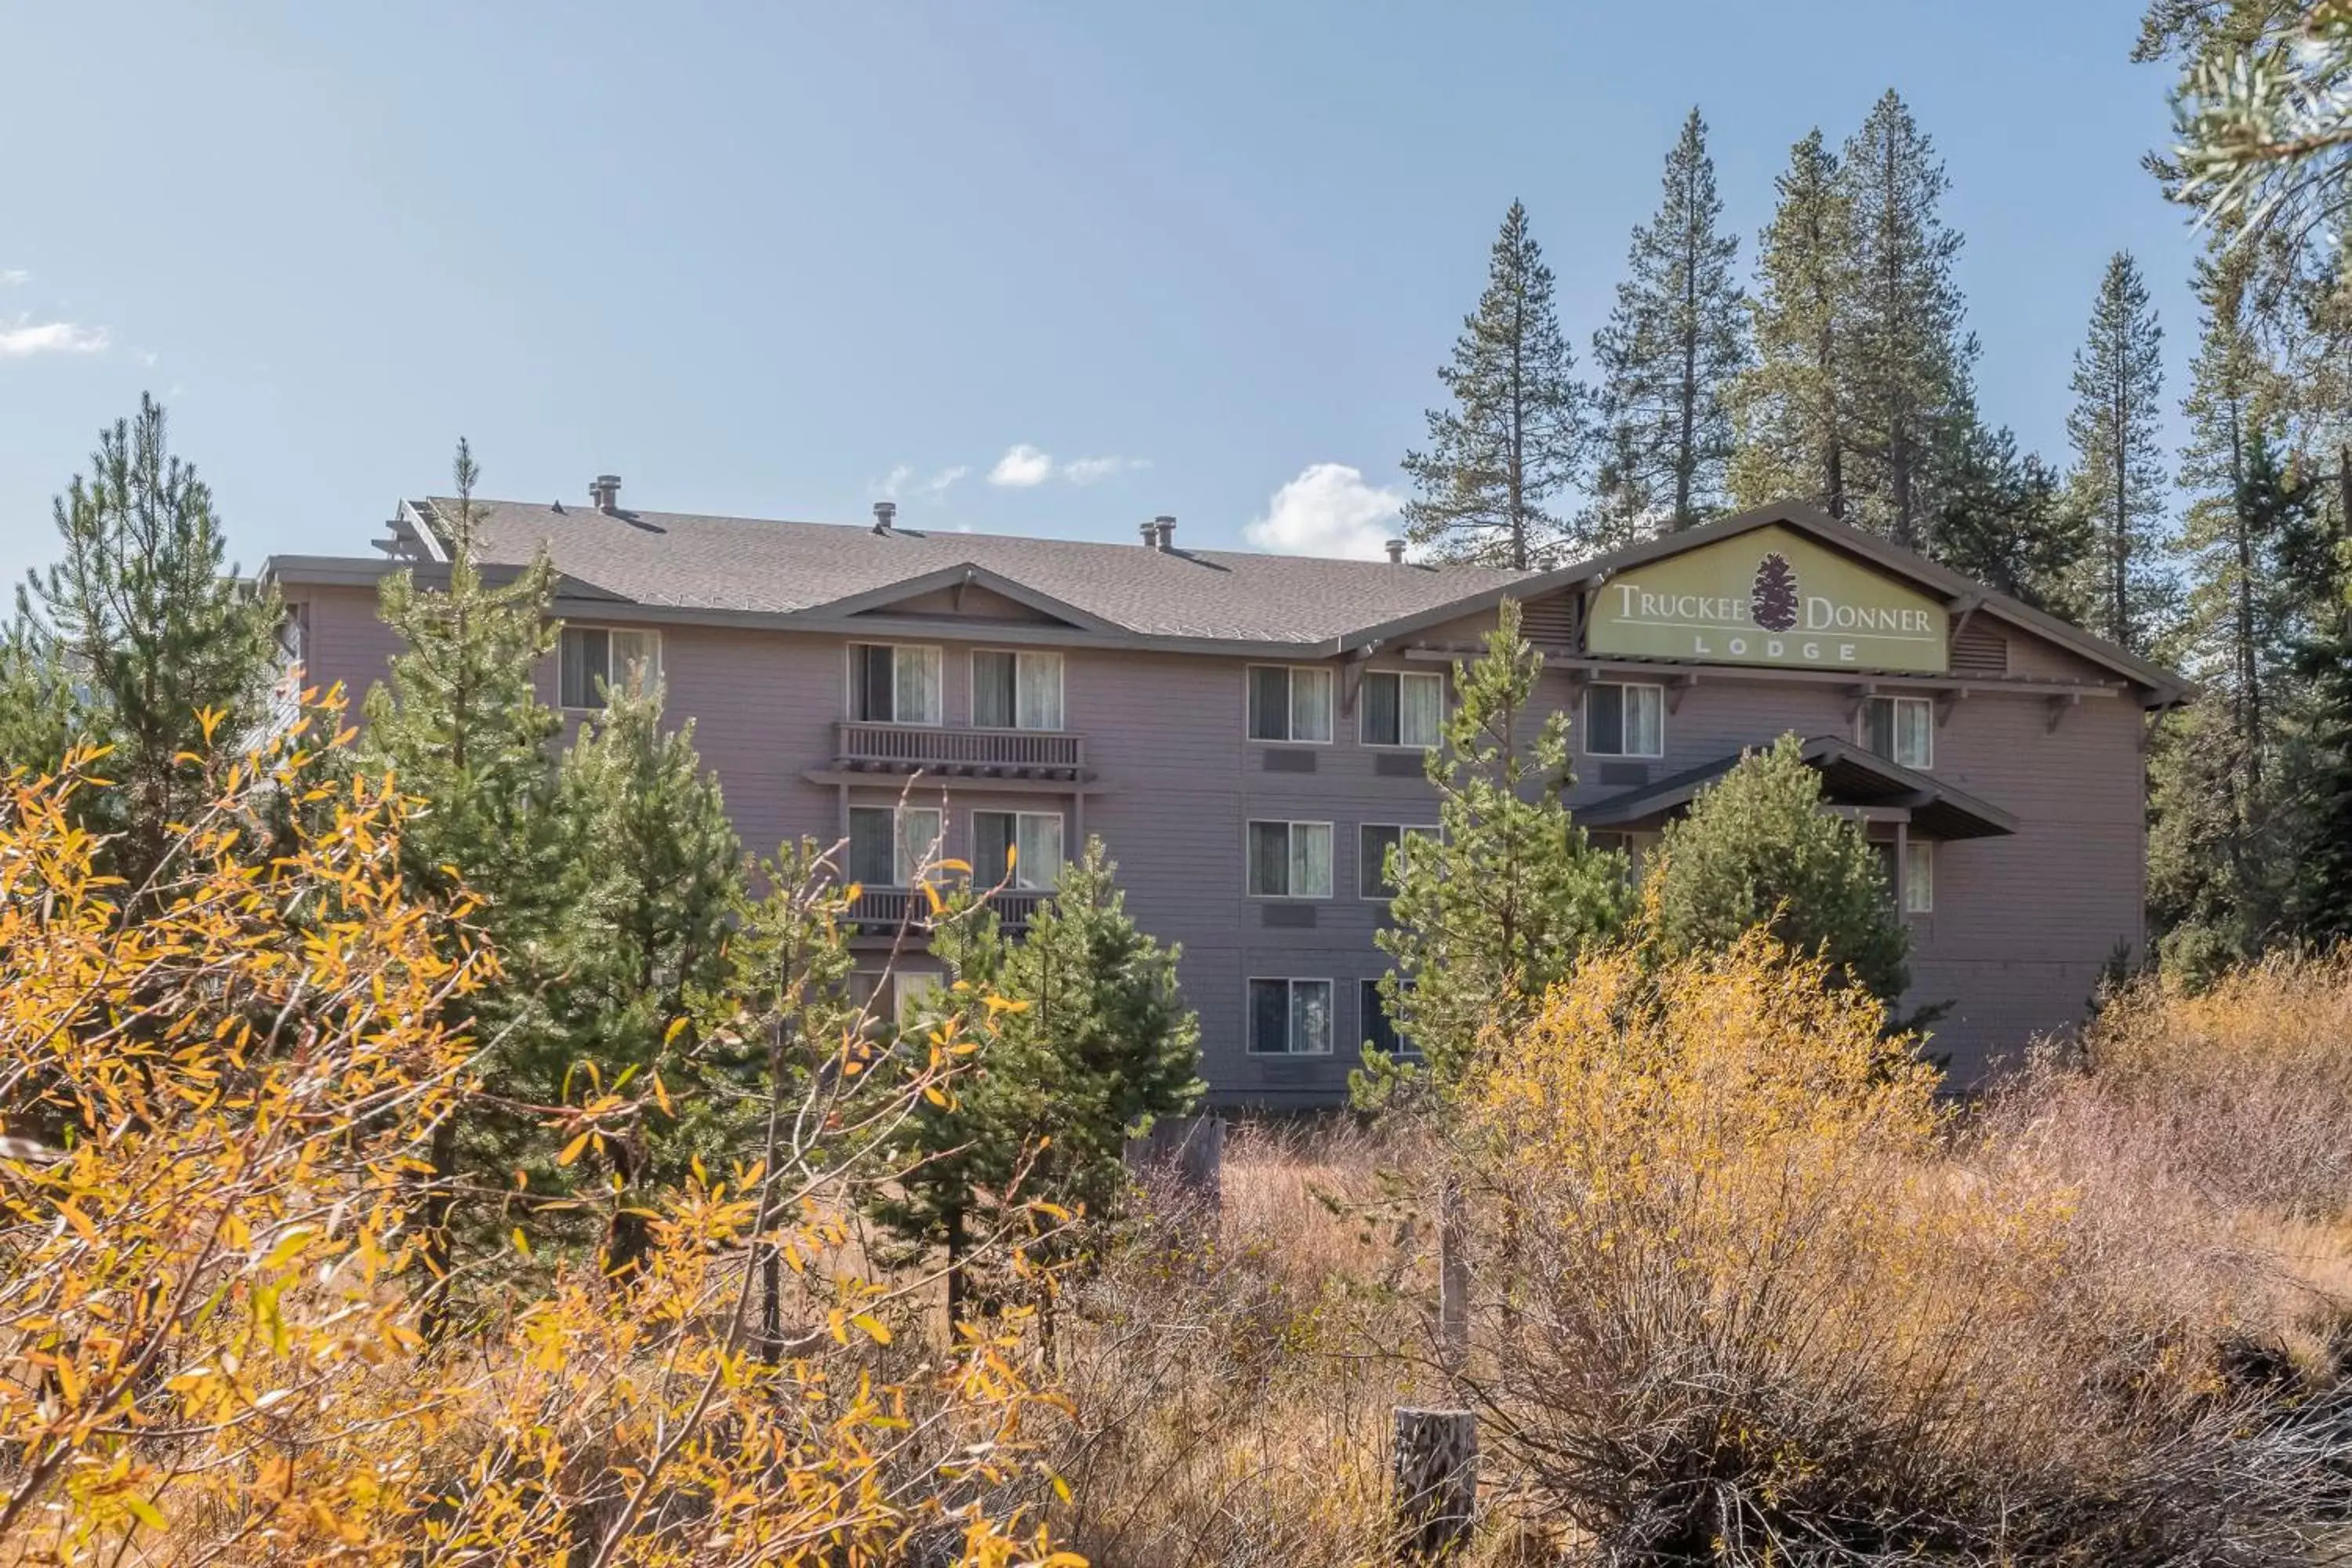 Mountain view, Property Building in Truckee Donner Lodge